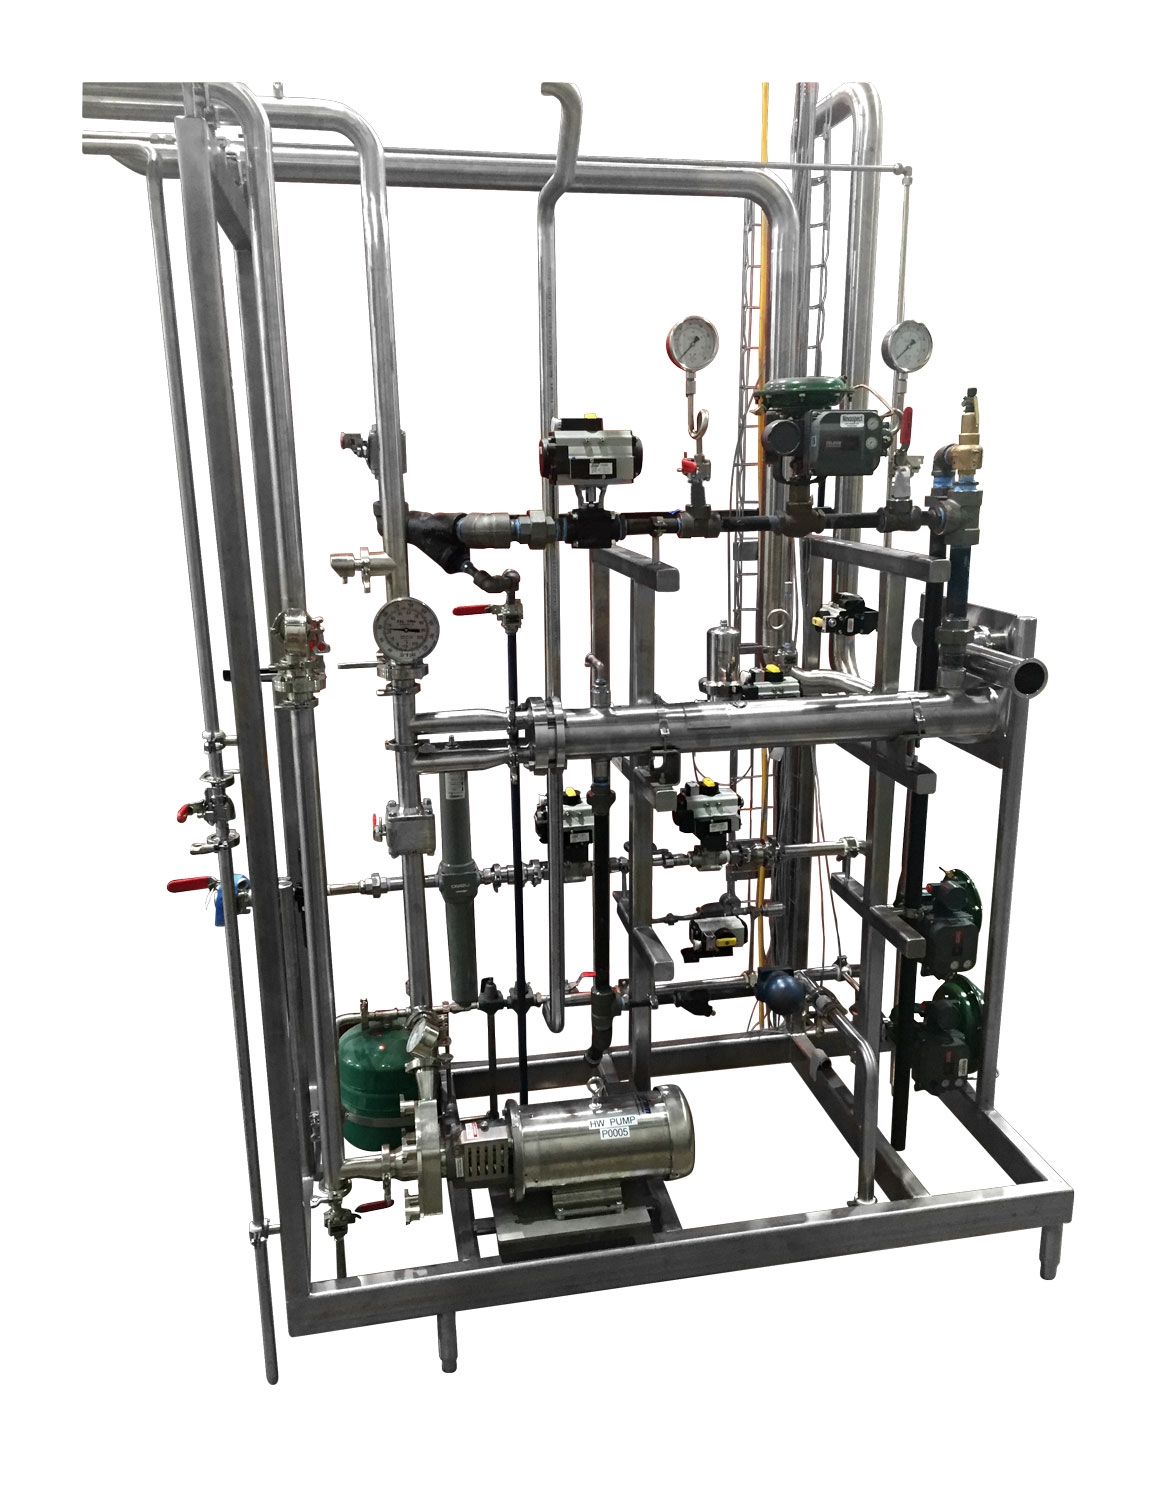 Module 131: Continuous flow hot-water systems in commercial and  institutional applications – CIBSE Journal